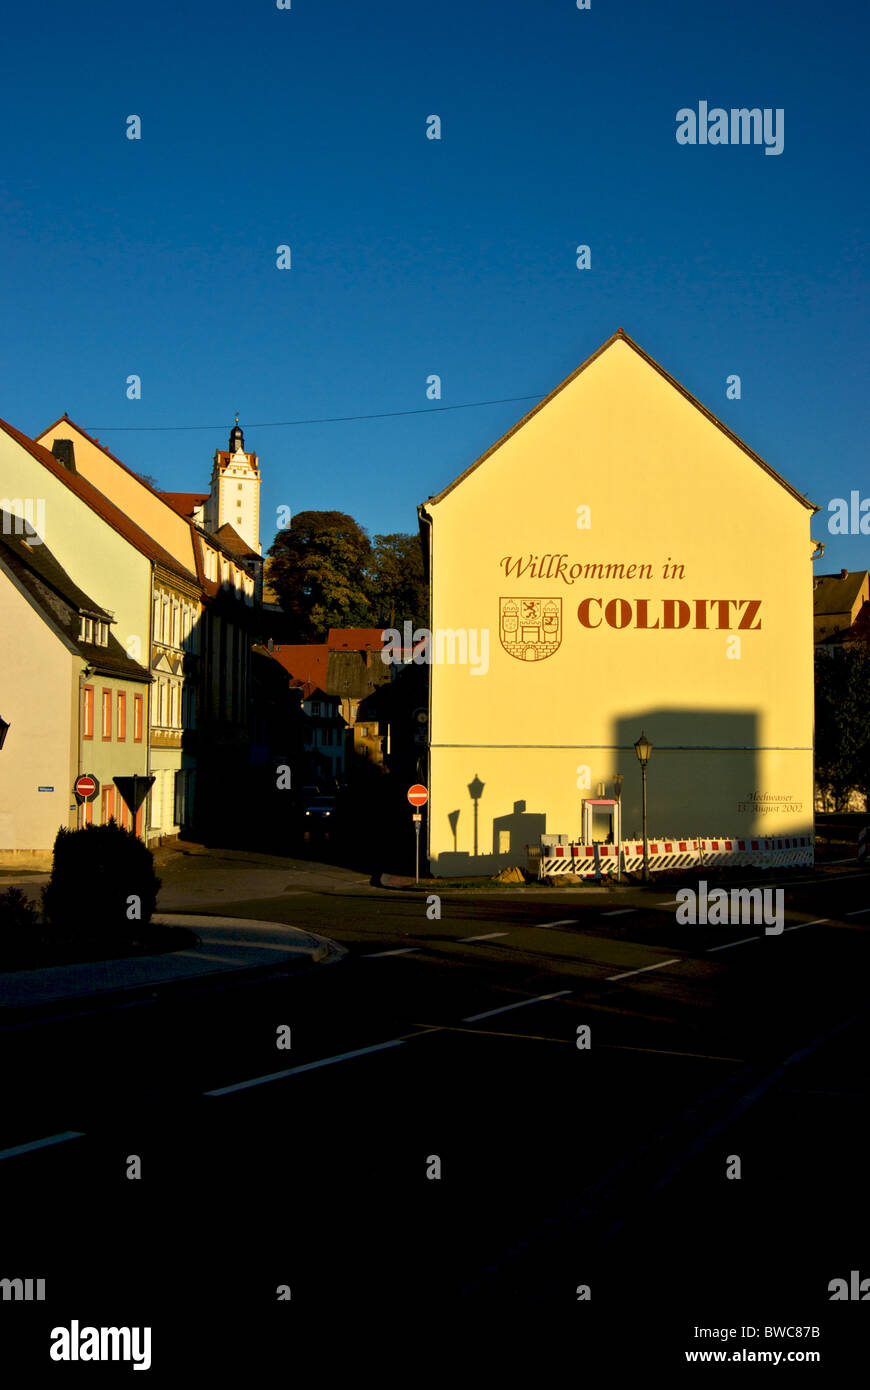 Colditz village site of castle where high ranking Allied officers were held in WWII as prisoners of war in escape proof prison Stock Photo